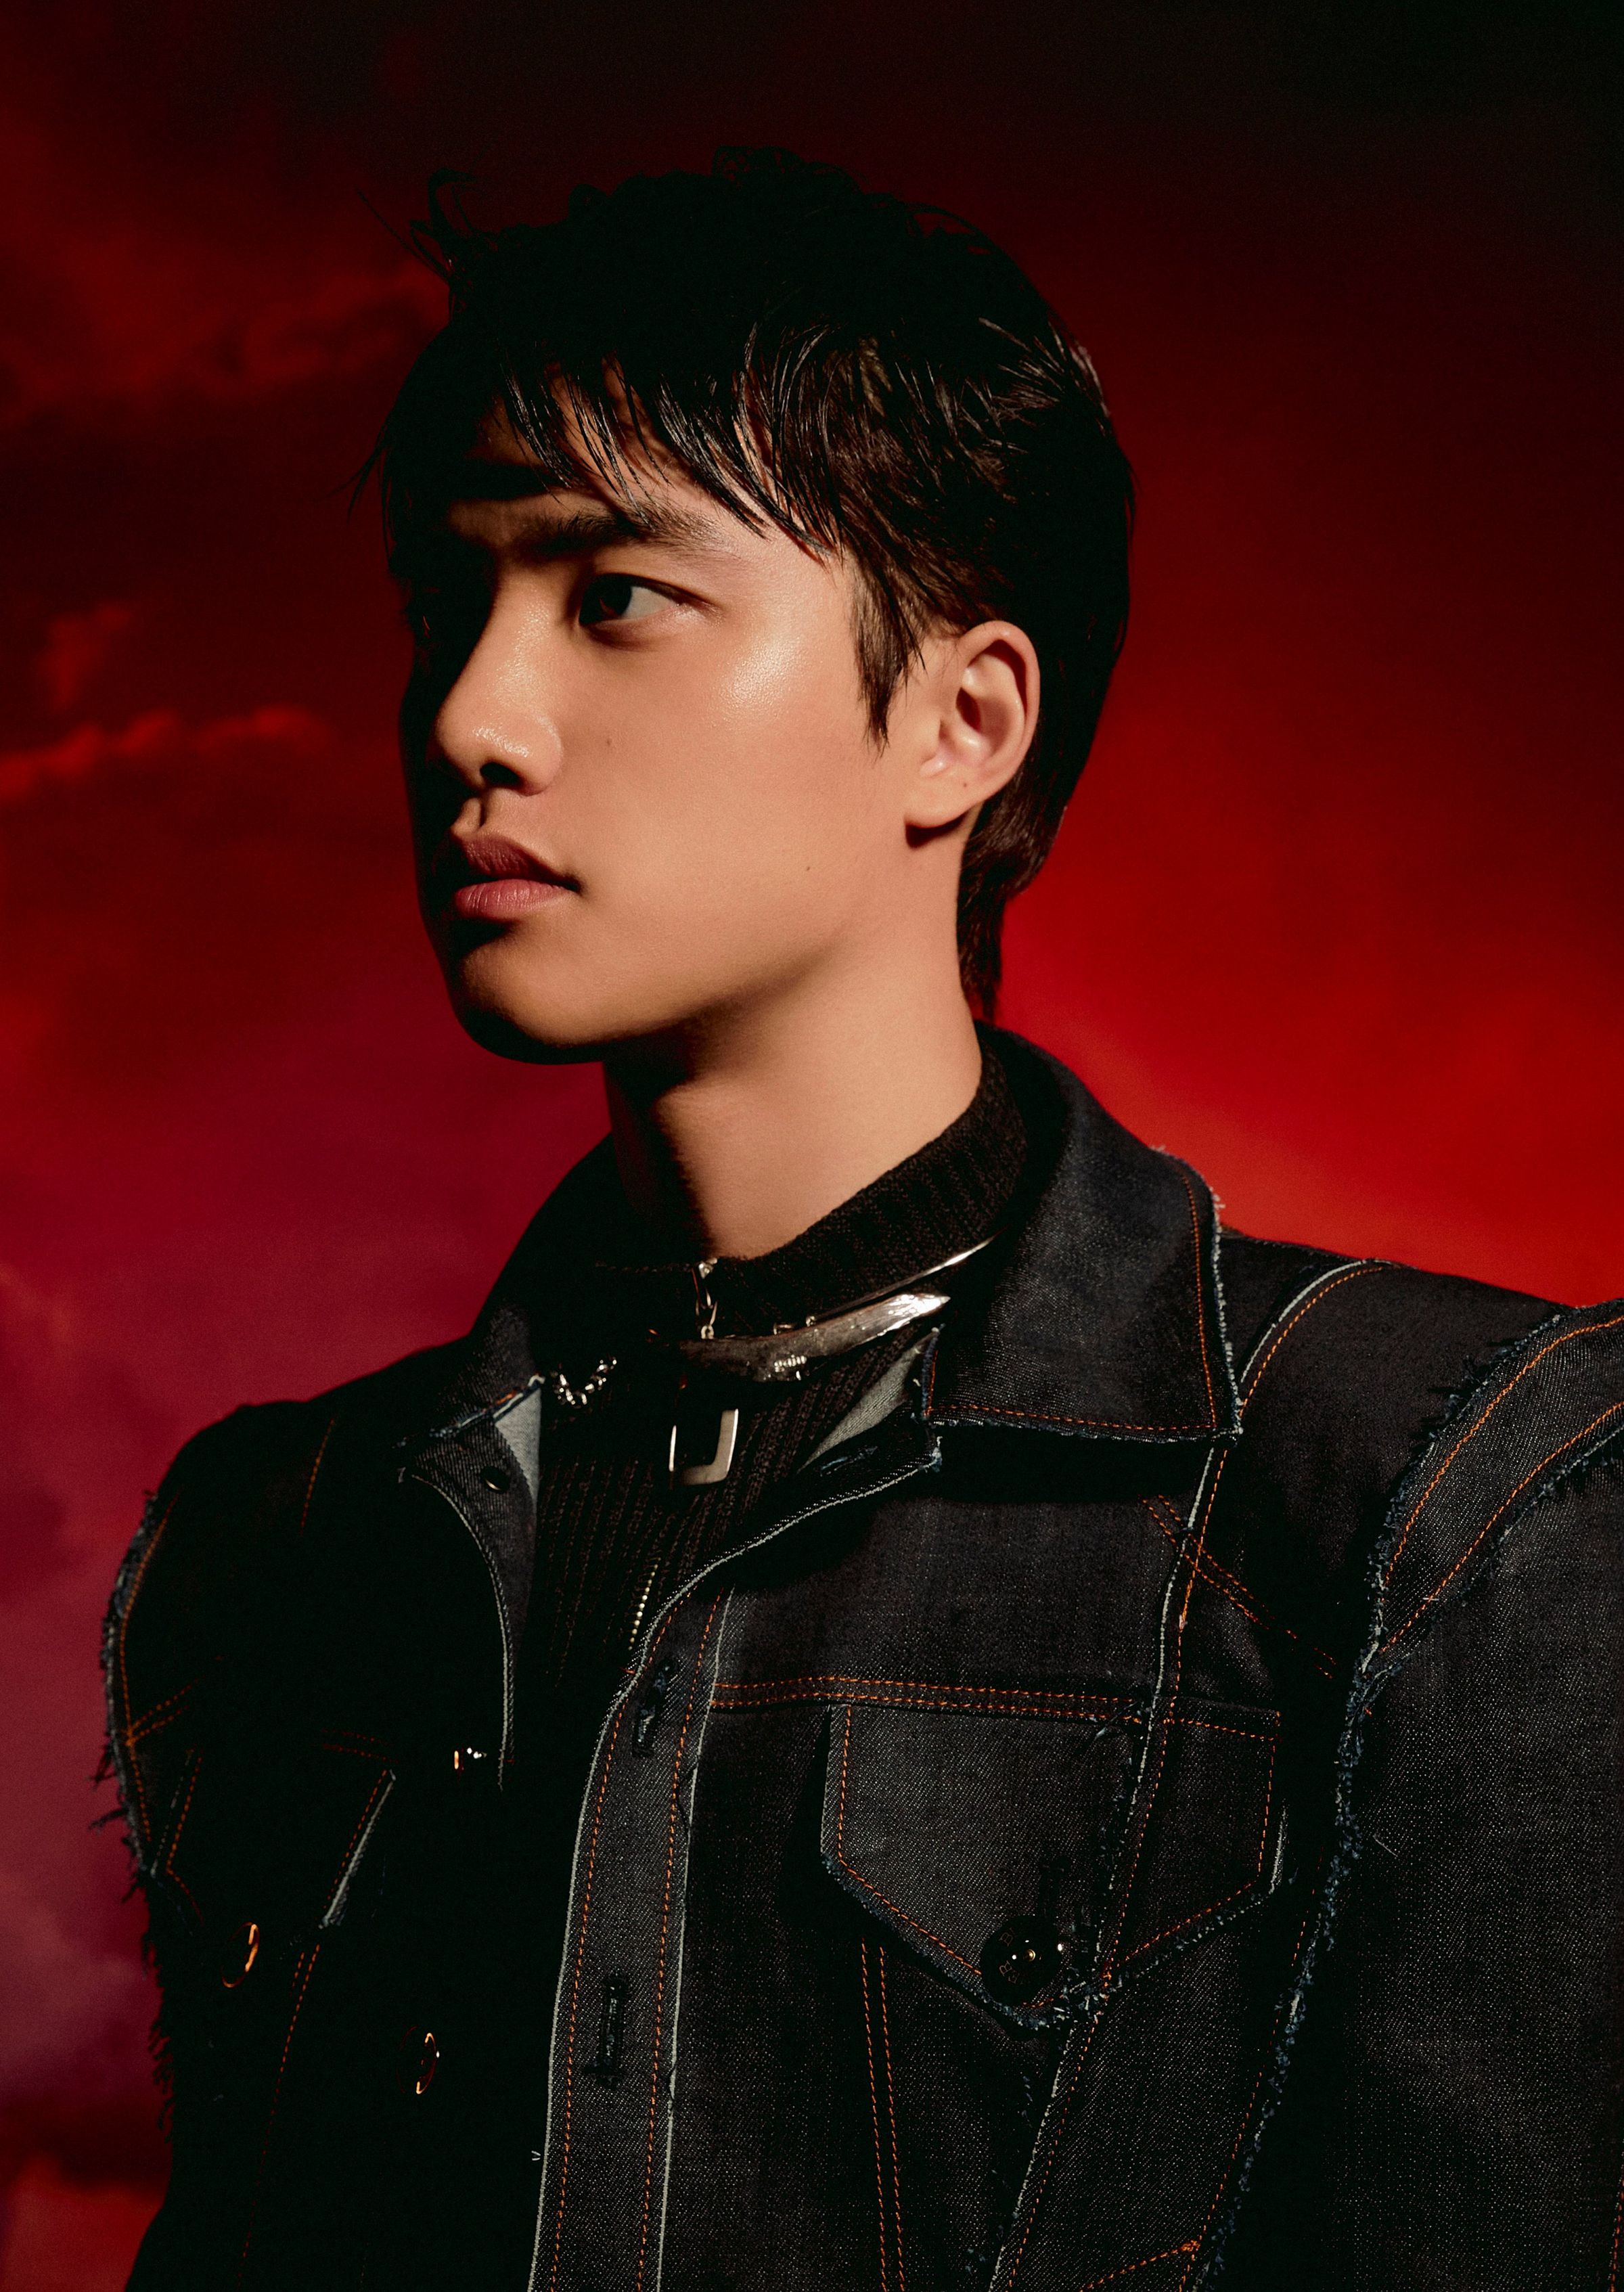 EXO [DON’T FIGHT THE FEELING] CONCEPT PHOTOS | K-PopMag